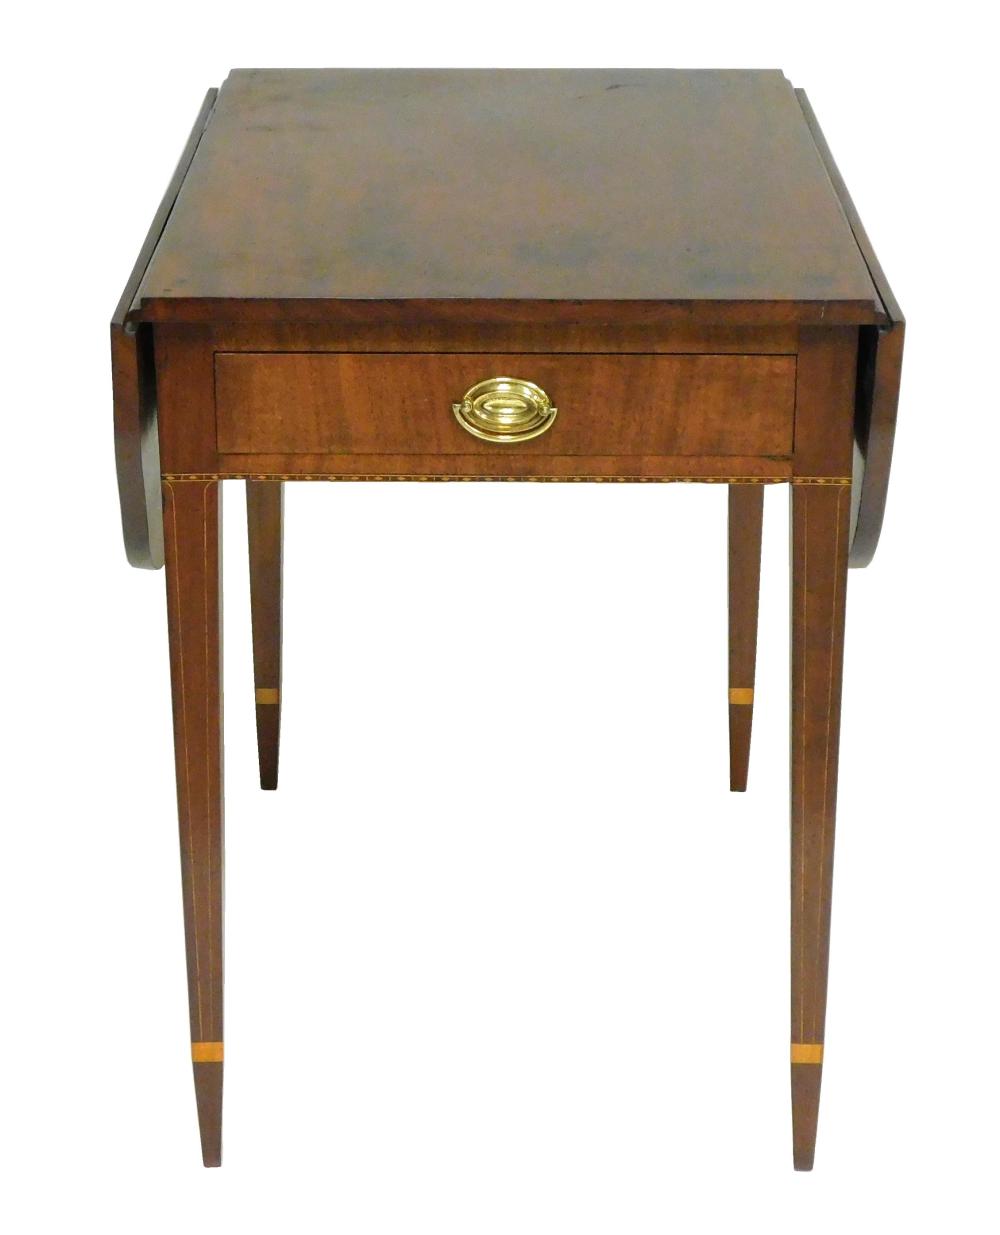 PEMBROKE TABLE 19TH C WITH REPAIRS 2df01d